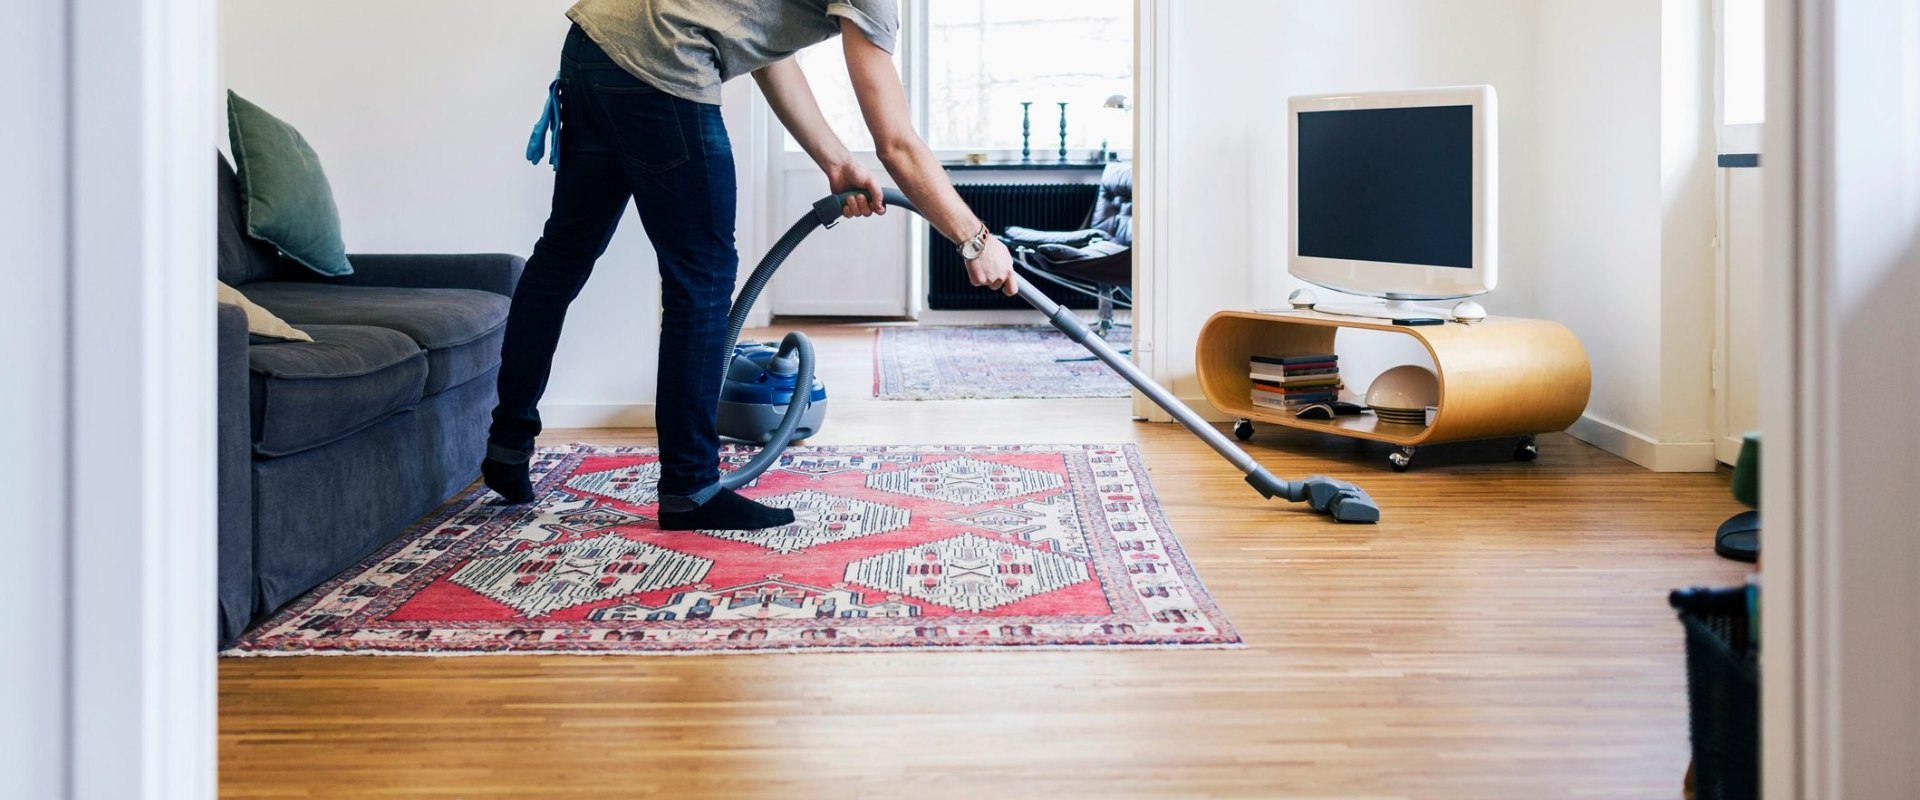 Are there any special techniques i should use when performing a monthly clean of my home?